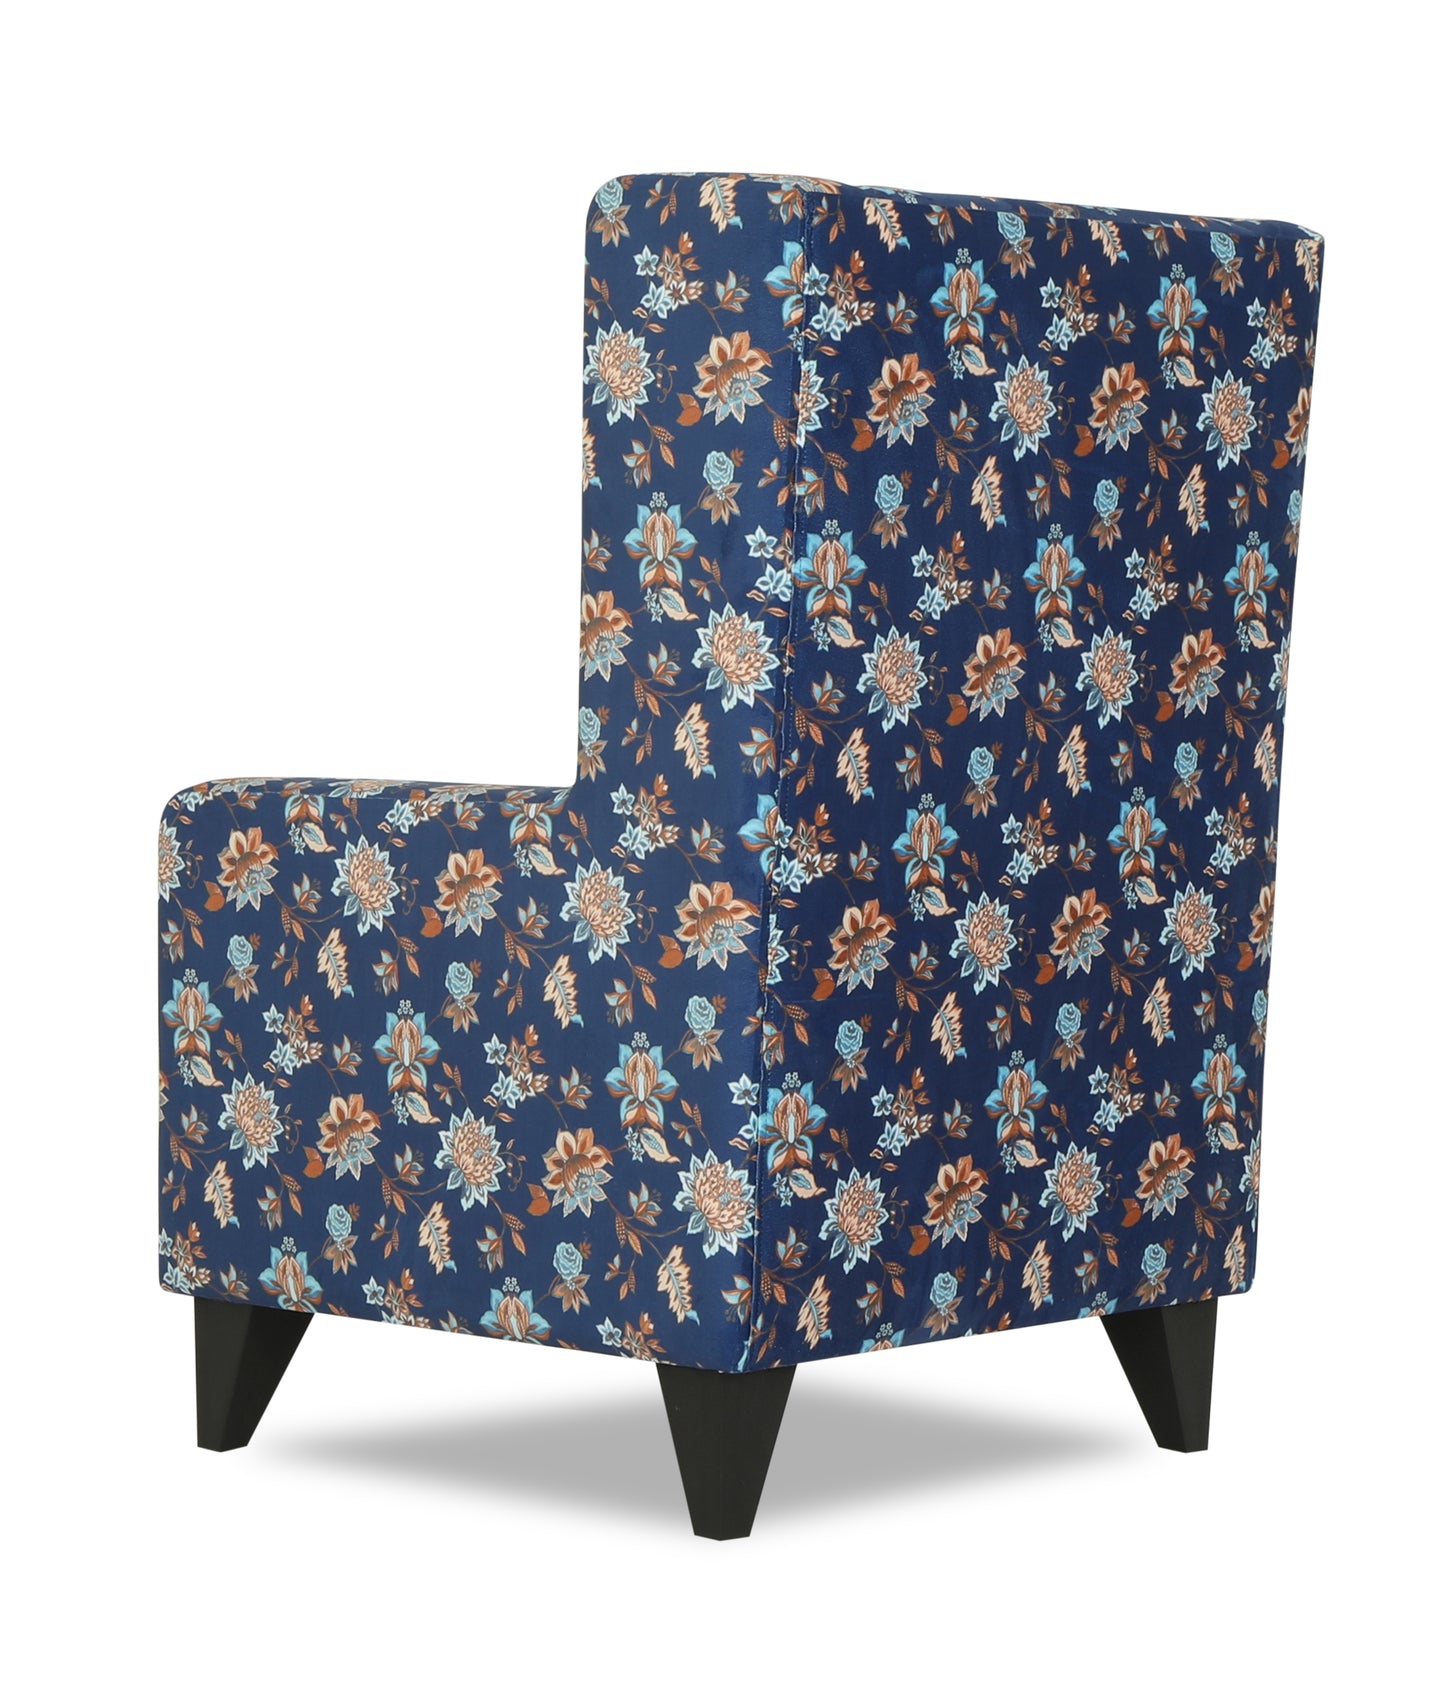 Adorn India Christopher 1 Seater Wing Chair Floral Print with Puffy (Blue)